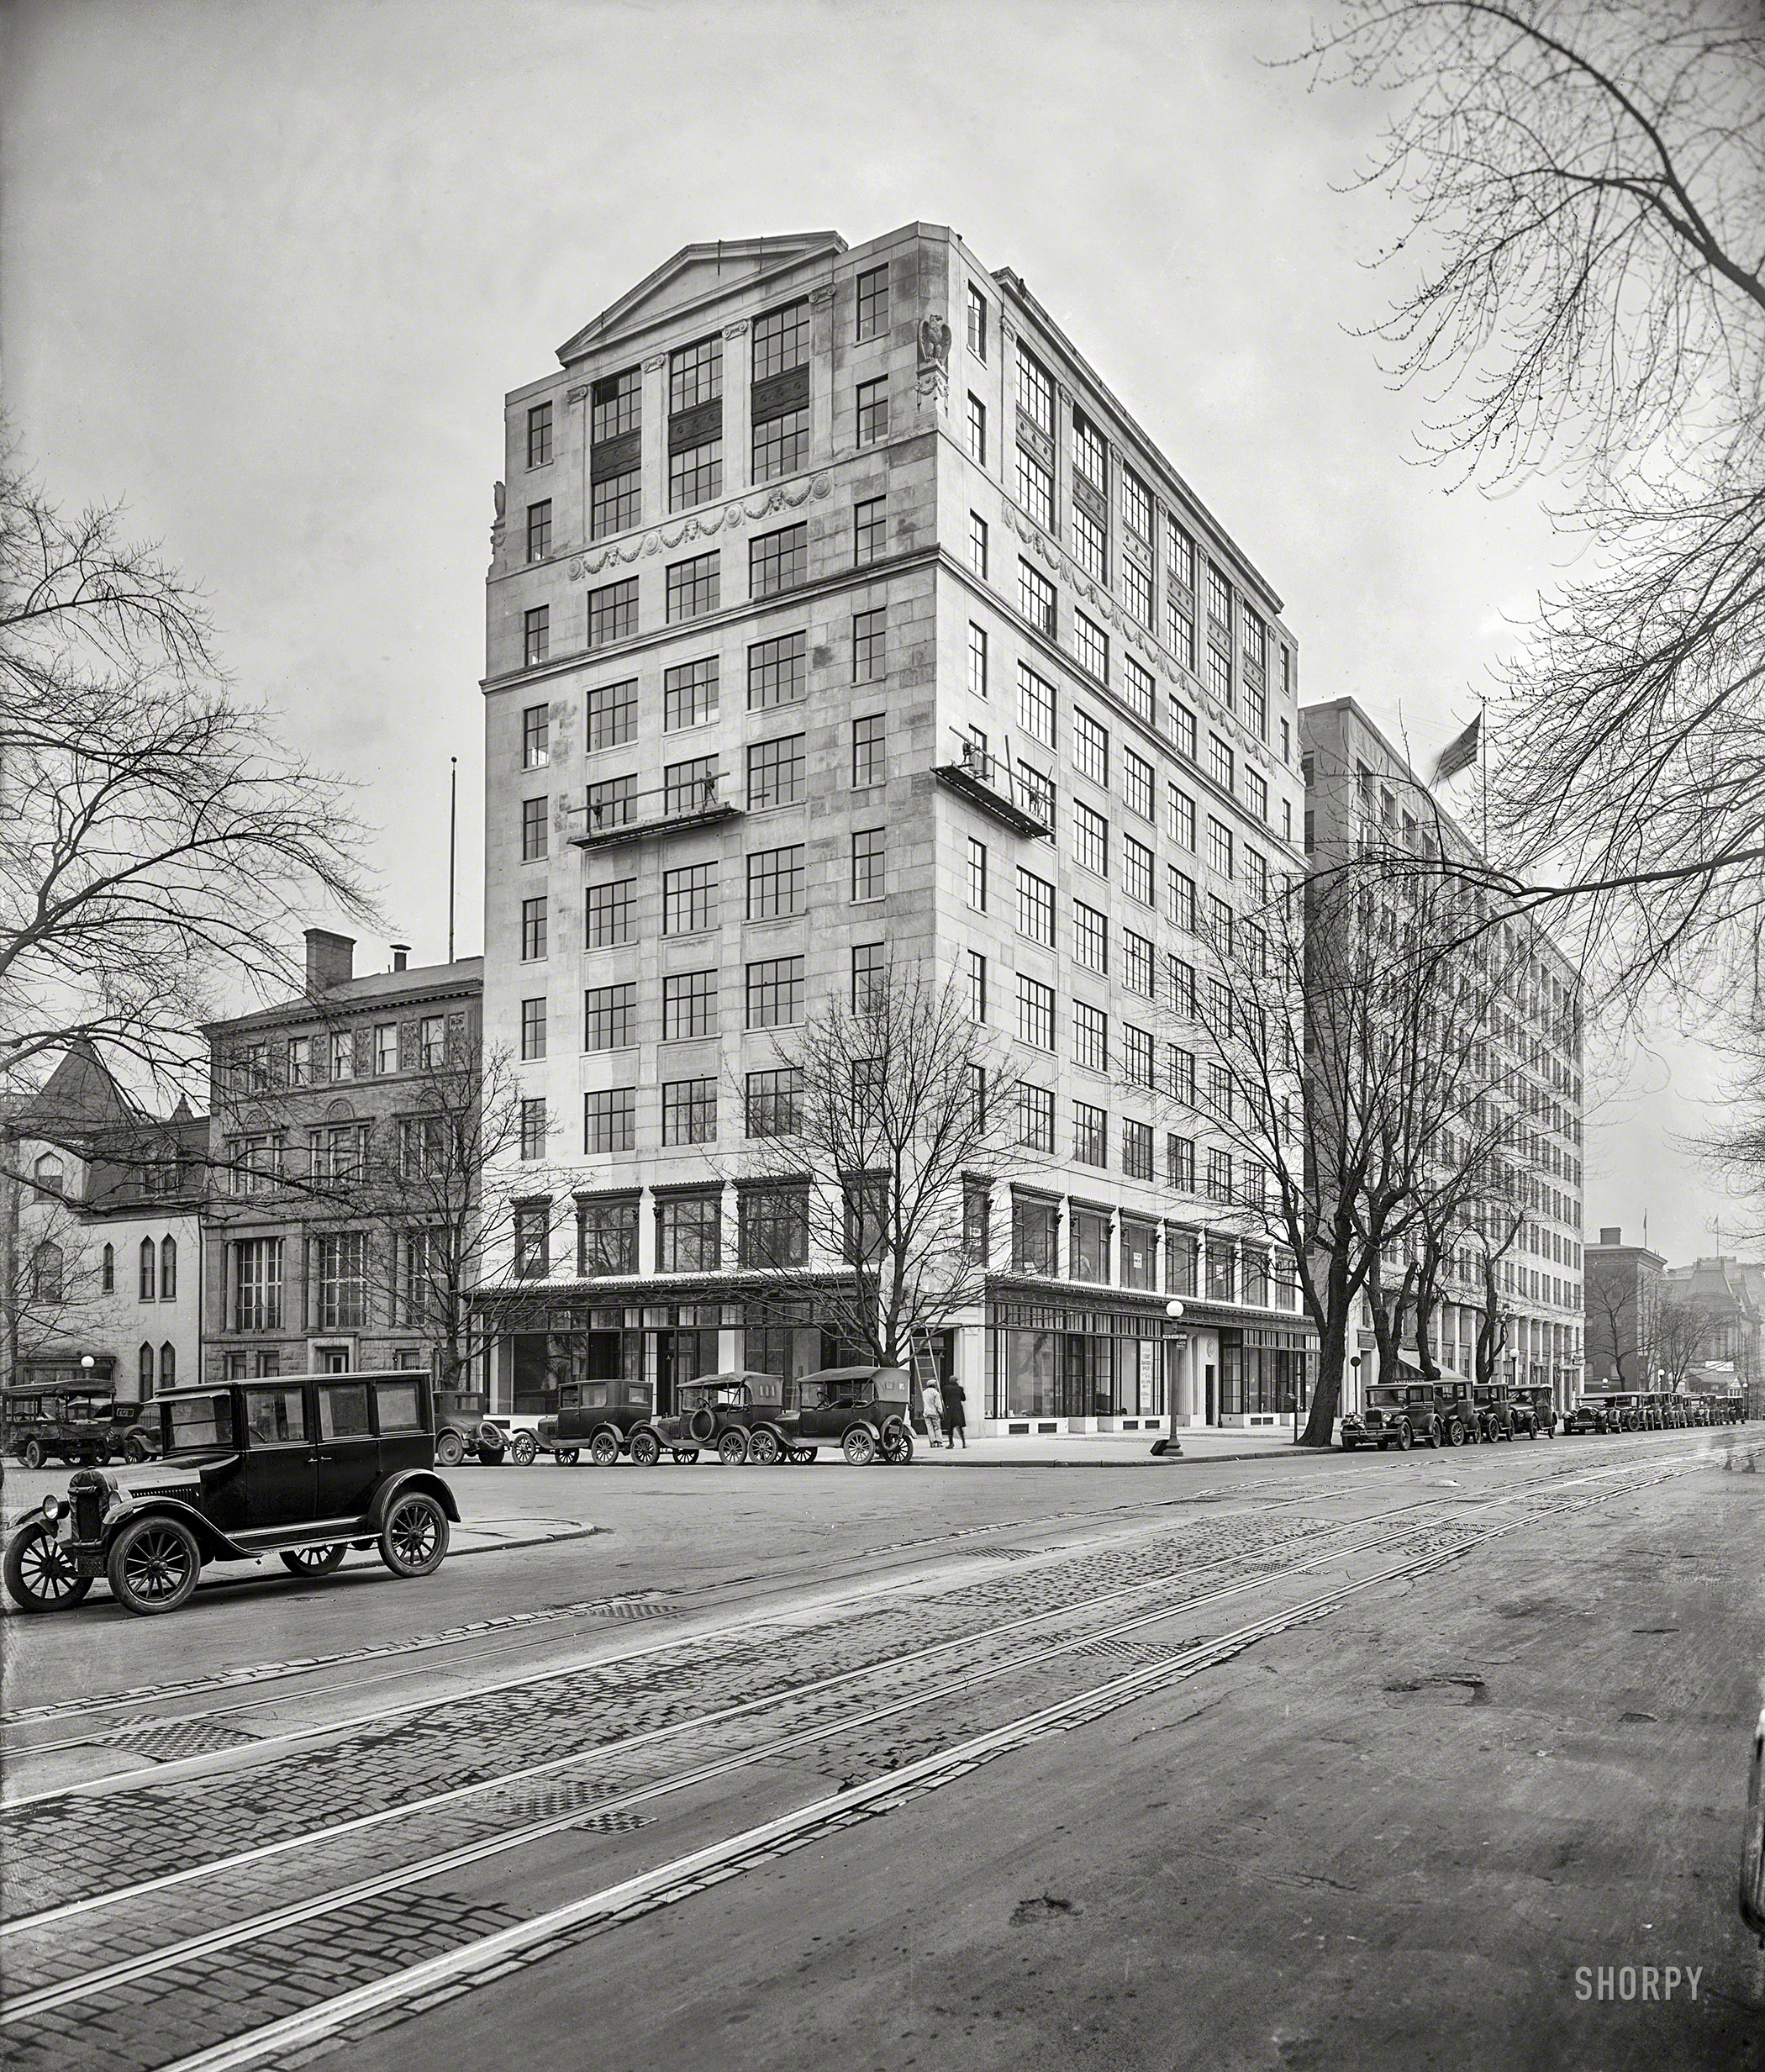 &nbsp; &nbsp; &nbsp; &nbsp; Connoisseurs of anodyne architecture will be pleased to learn that this building still stands.
Washington, D.C., circa 1926. "Hill Bldg., 17th and Eye Streets N.W." National Photo Company Collection glass negative. View full size.